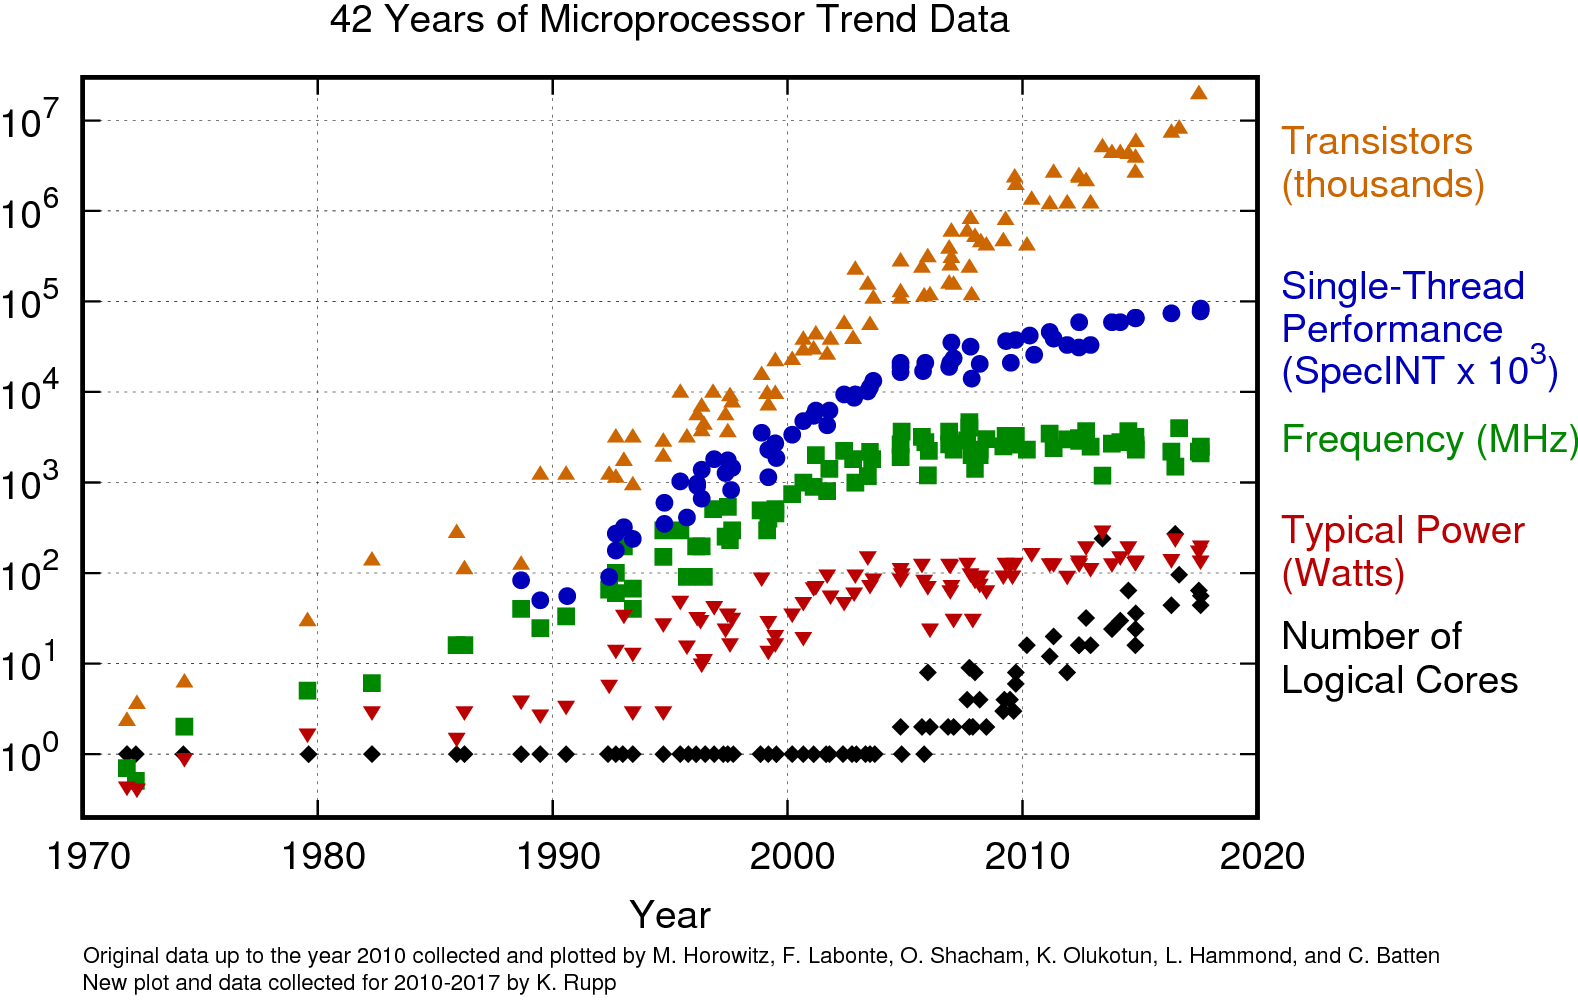 42 Years of Microprocessor Trend Data